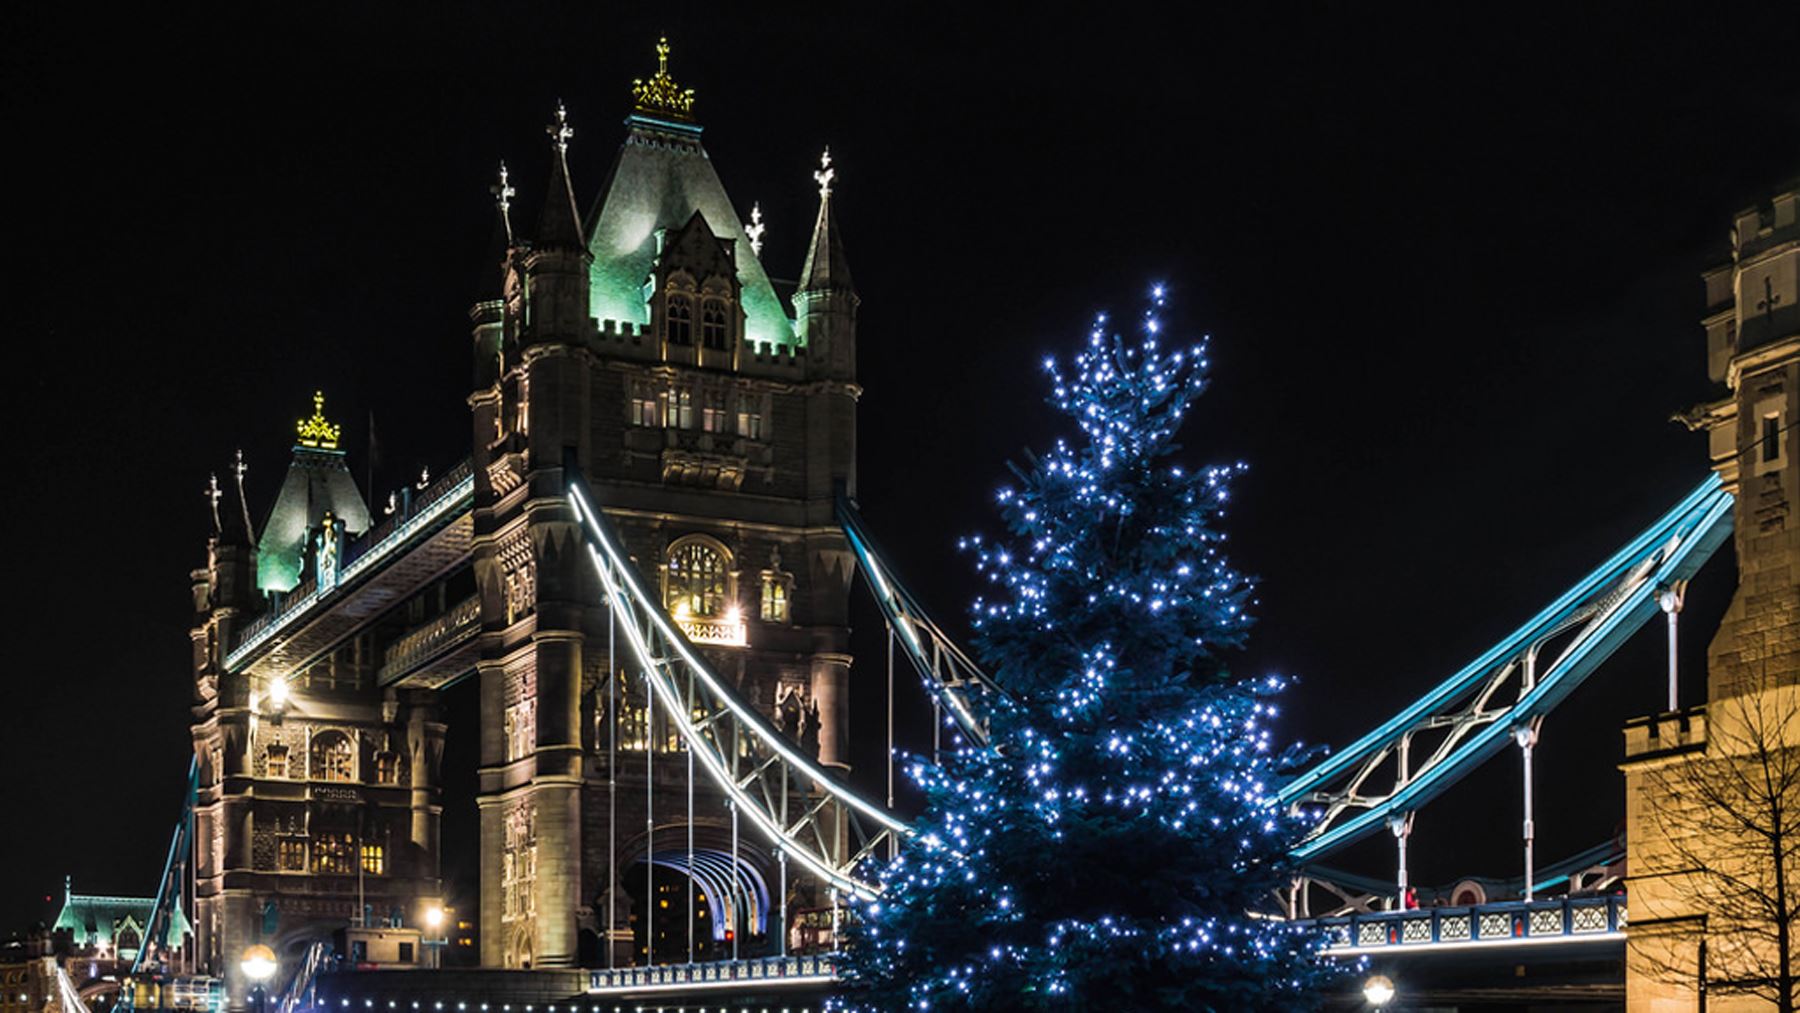 5 Things we were impressed by at the London Bridge Christmas Market